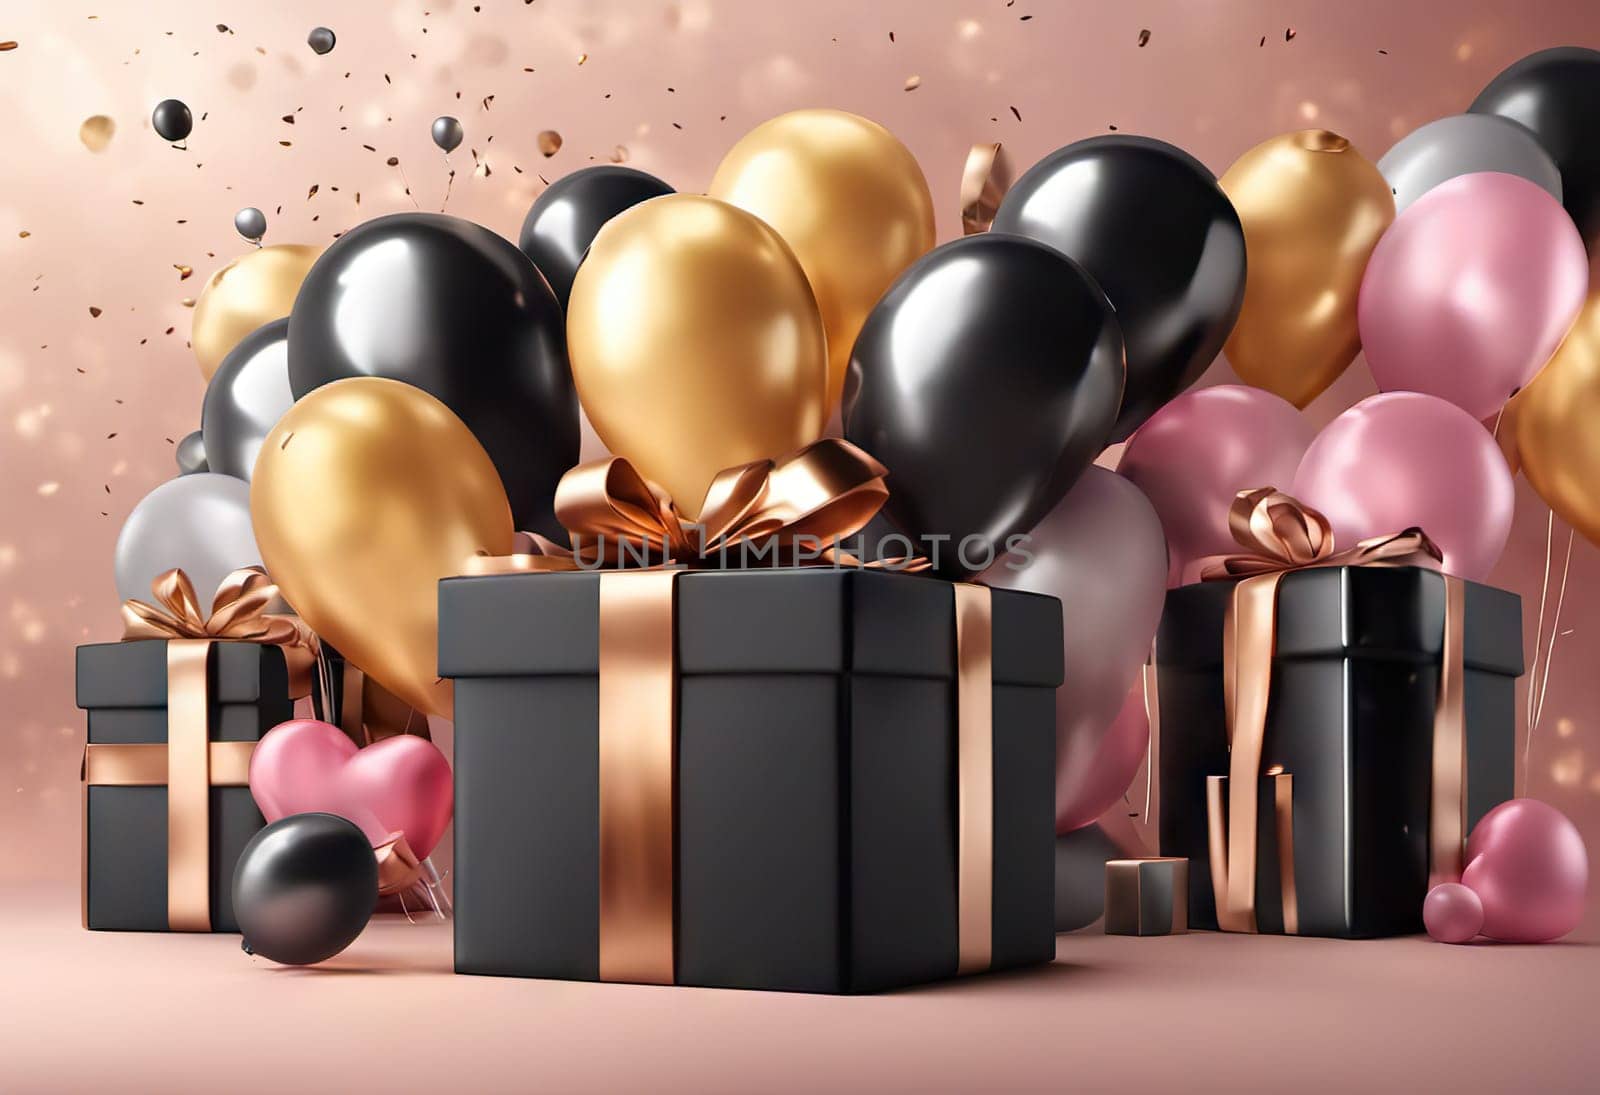 present box and balloons on background. suitable for any holiday. Black Friday sales and discounts by EkaterinaPereslavtseva